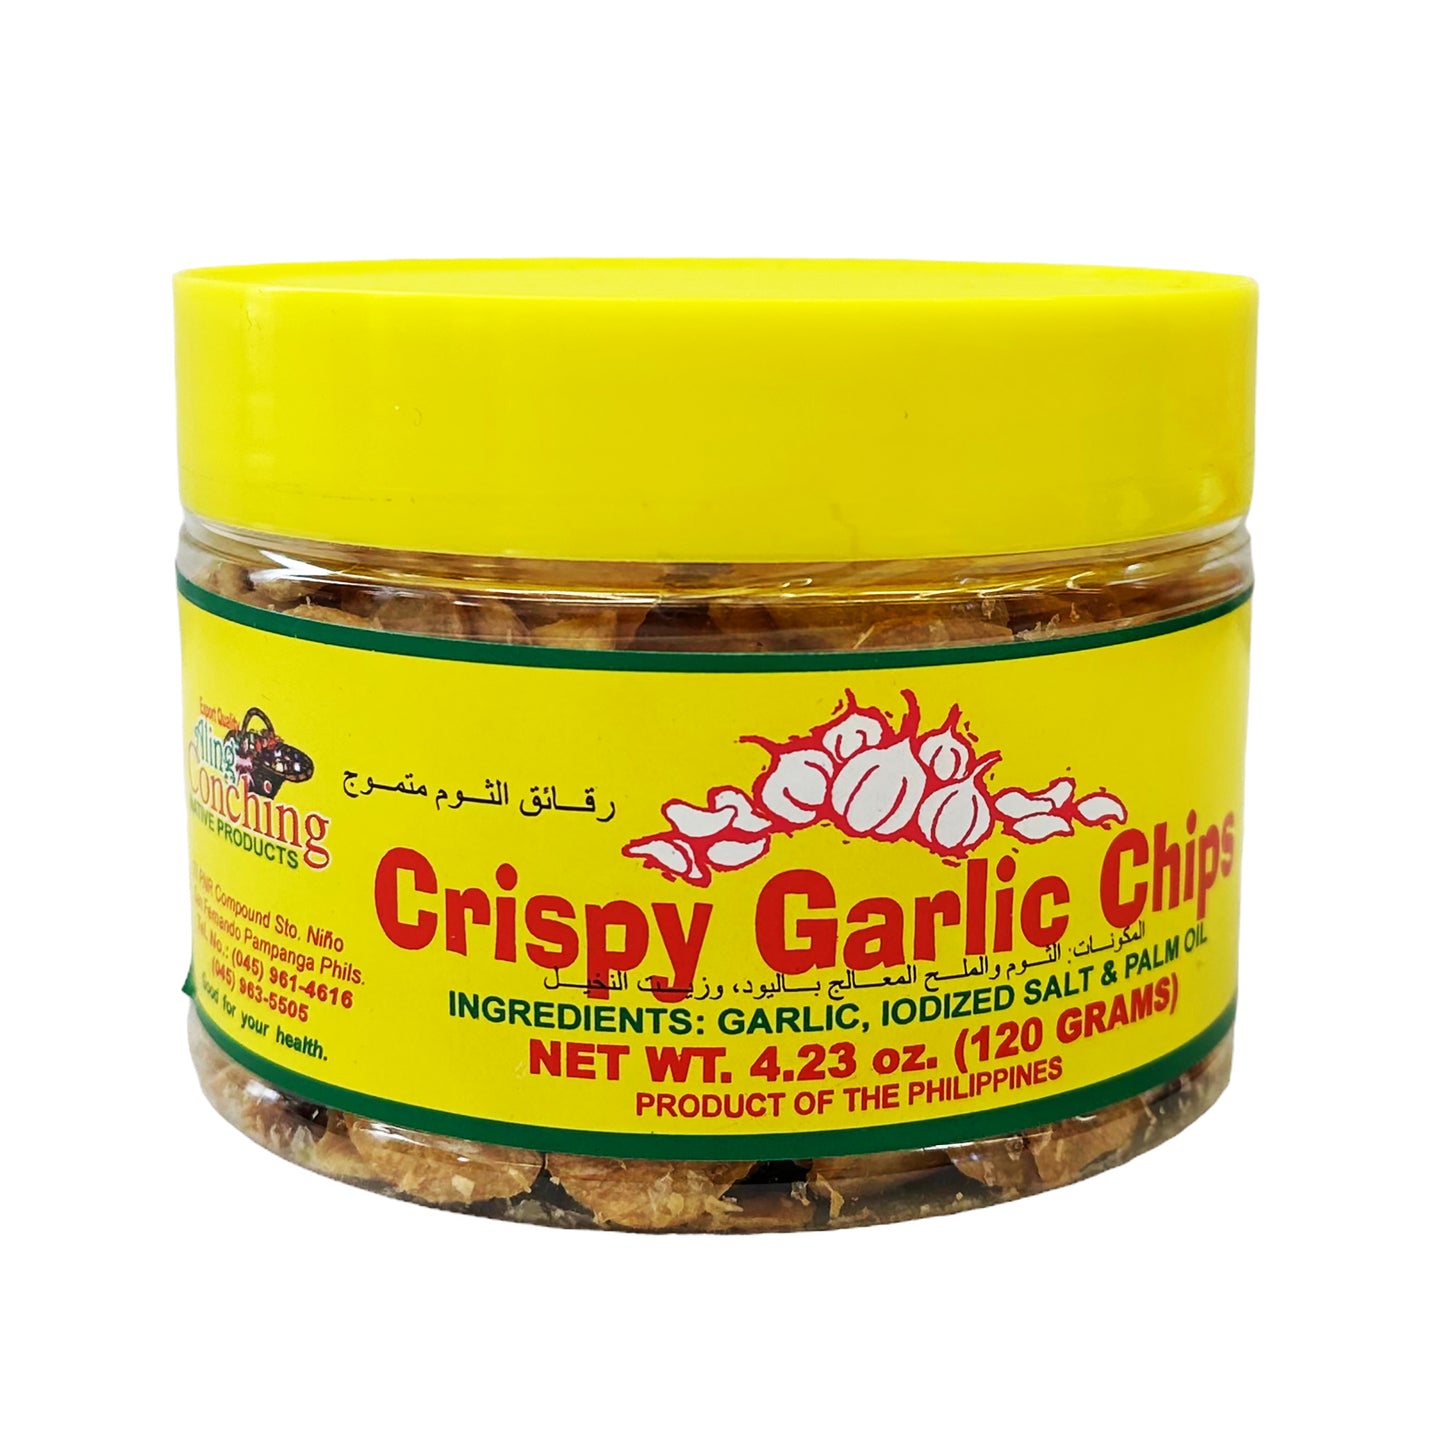 Front graphic image of Aling Conching Crispy Garlic Chips 4.23oz (120g)